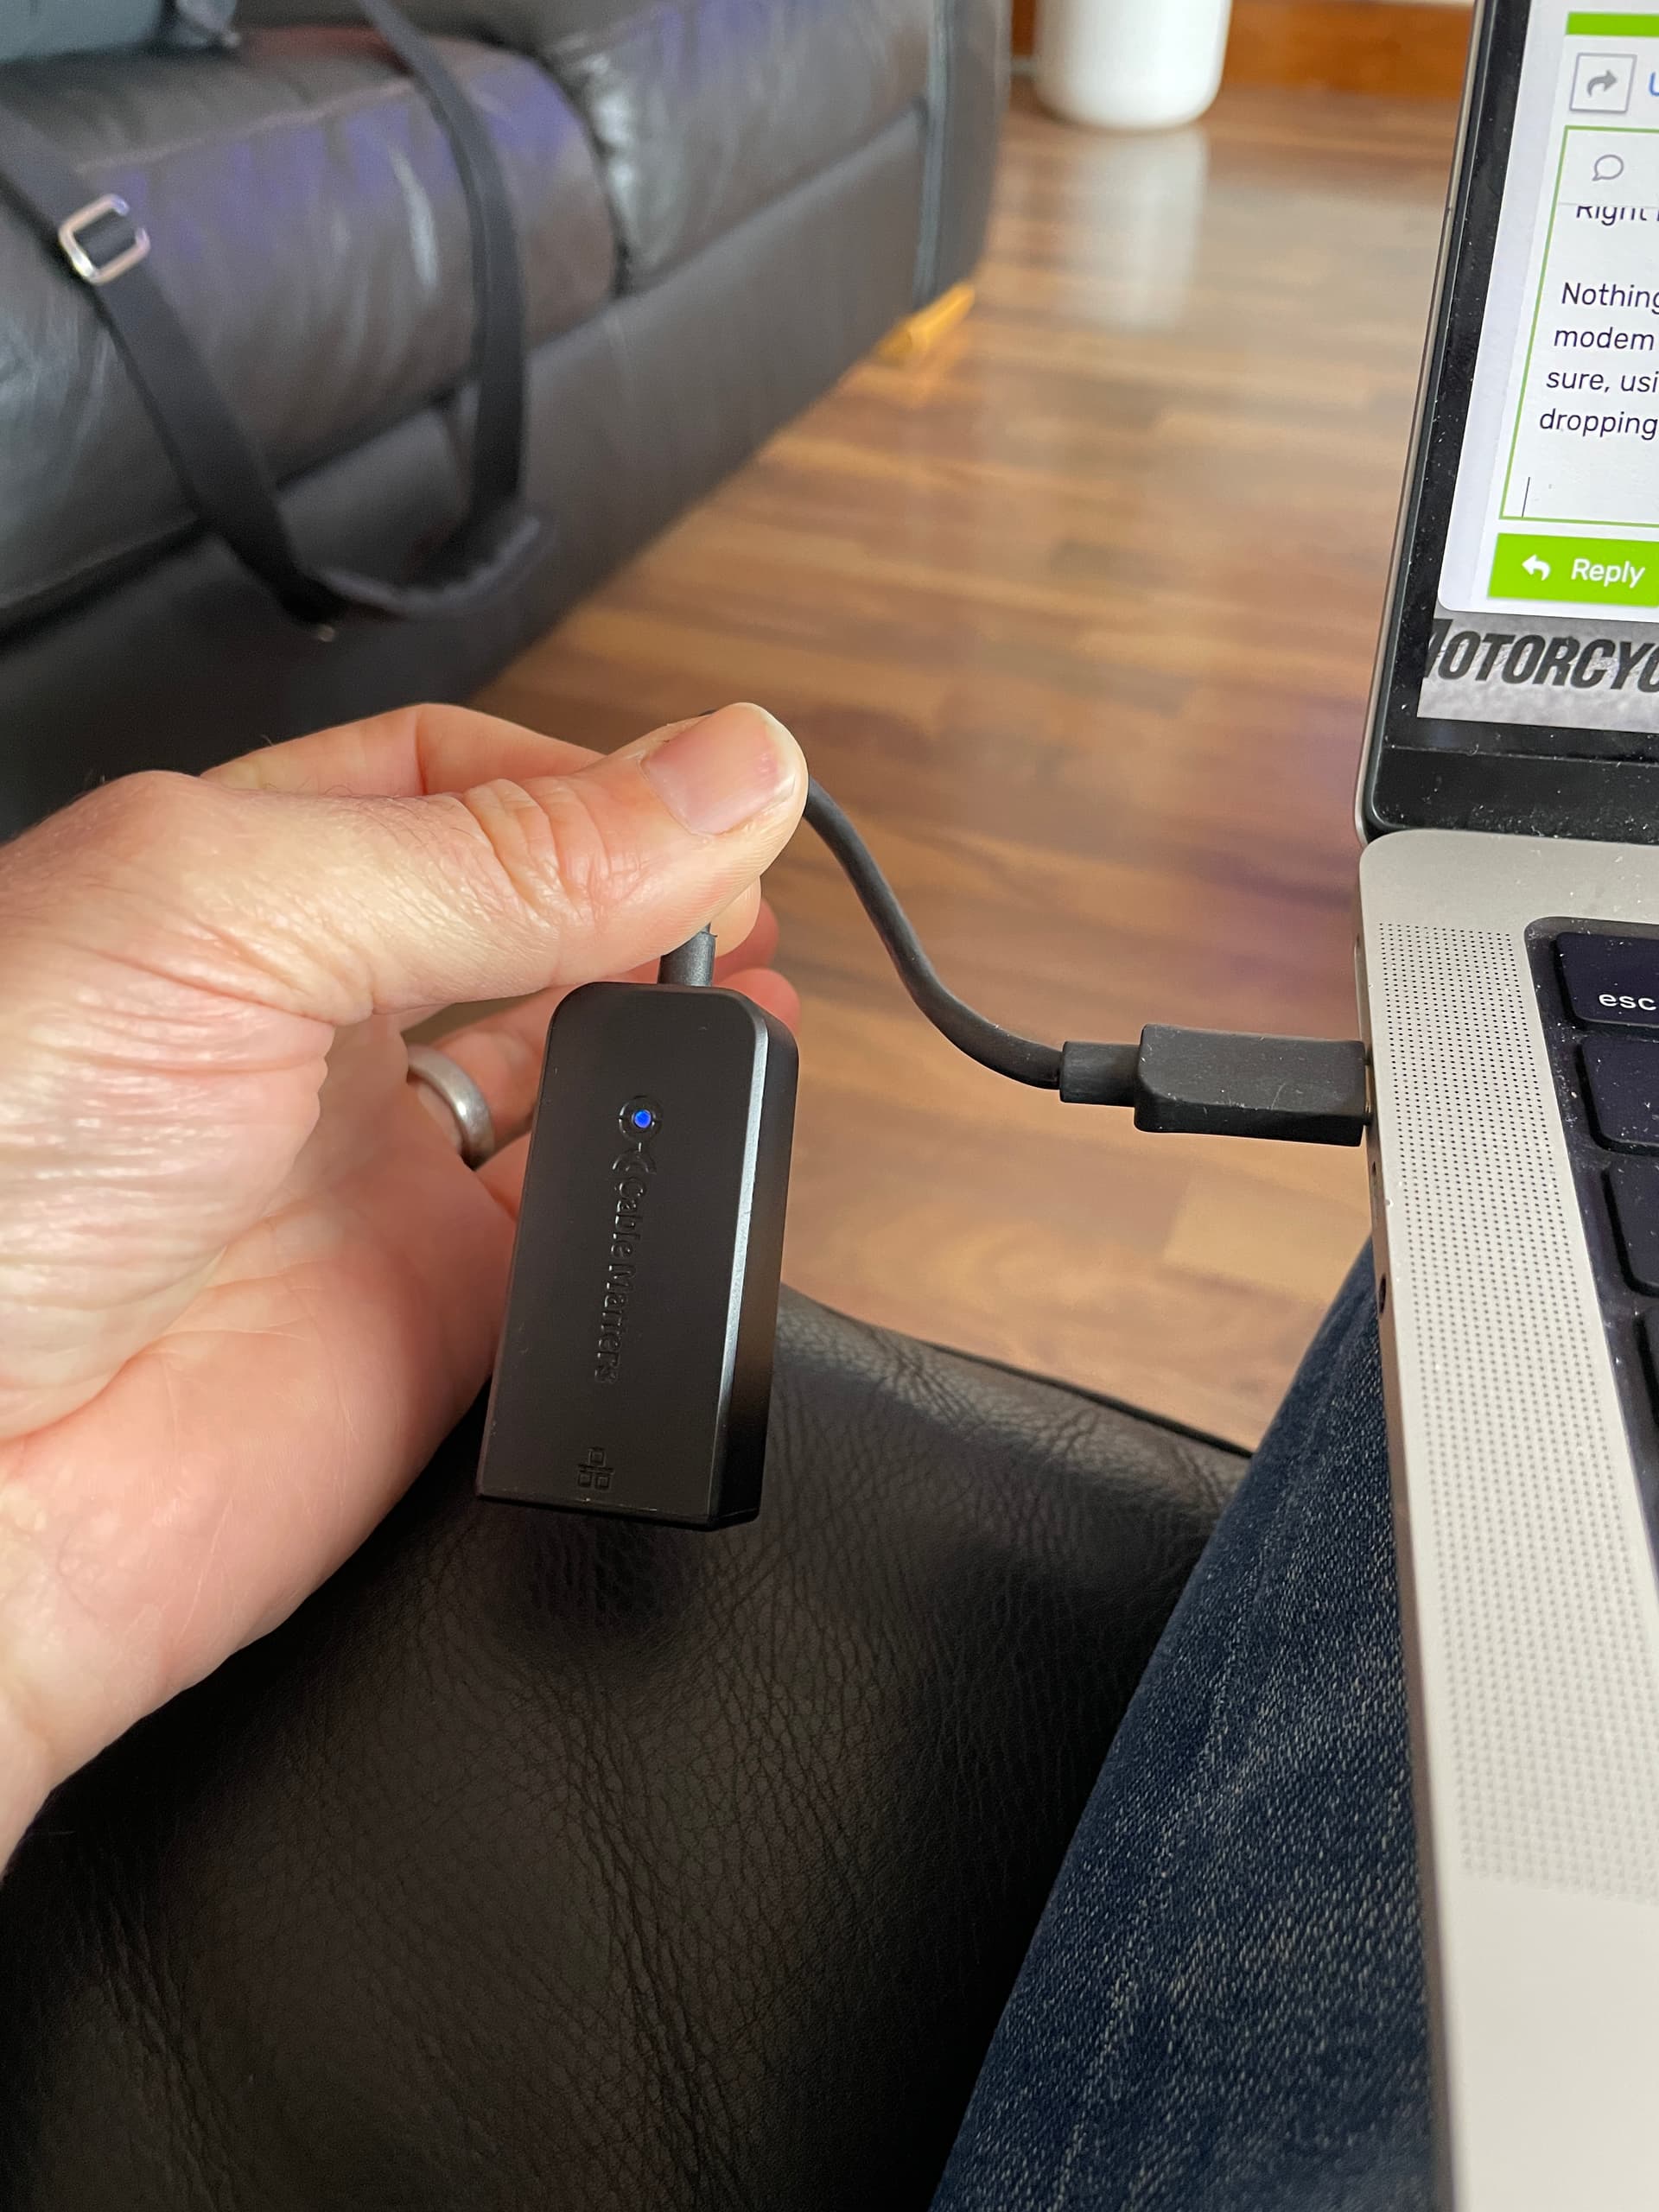 Why everyone needs a Ravpower Filehub in their computer bag